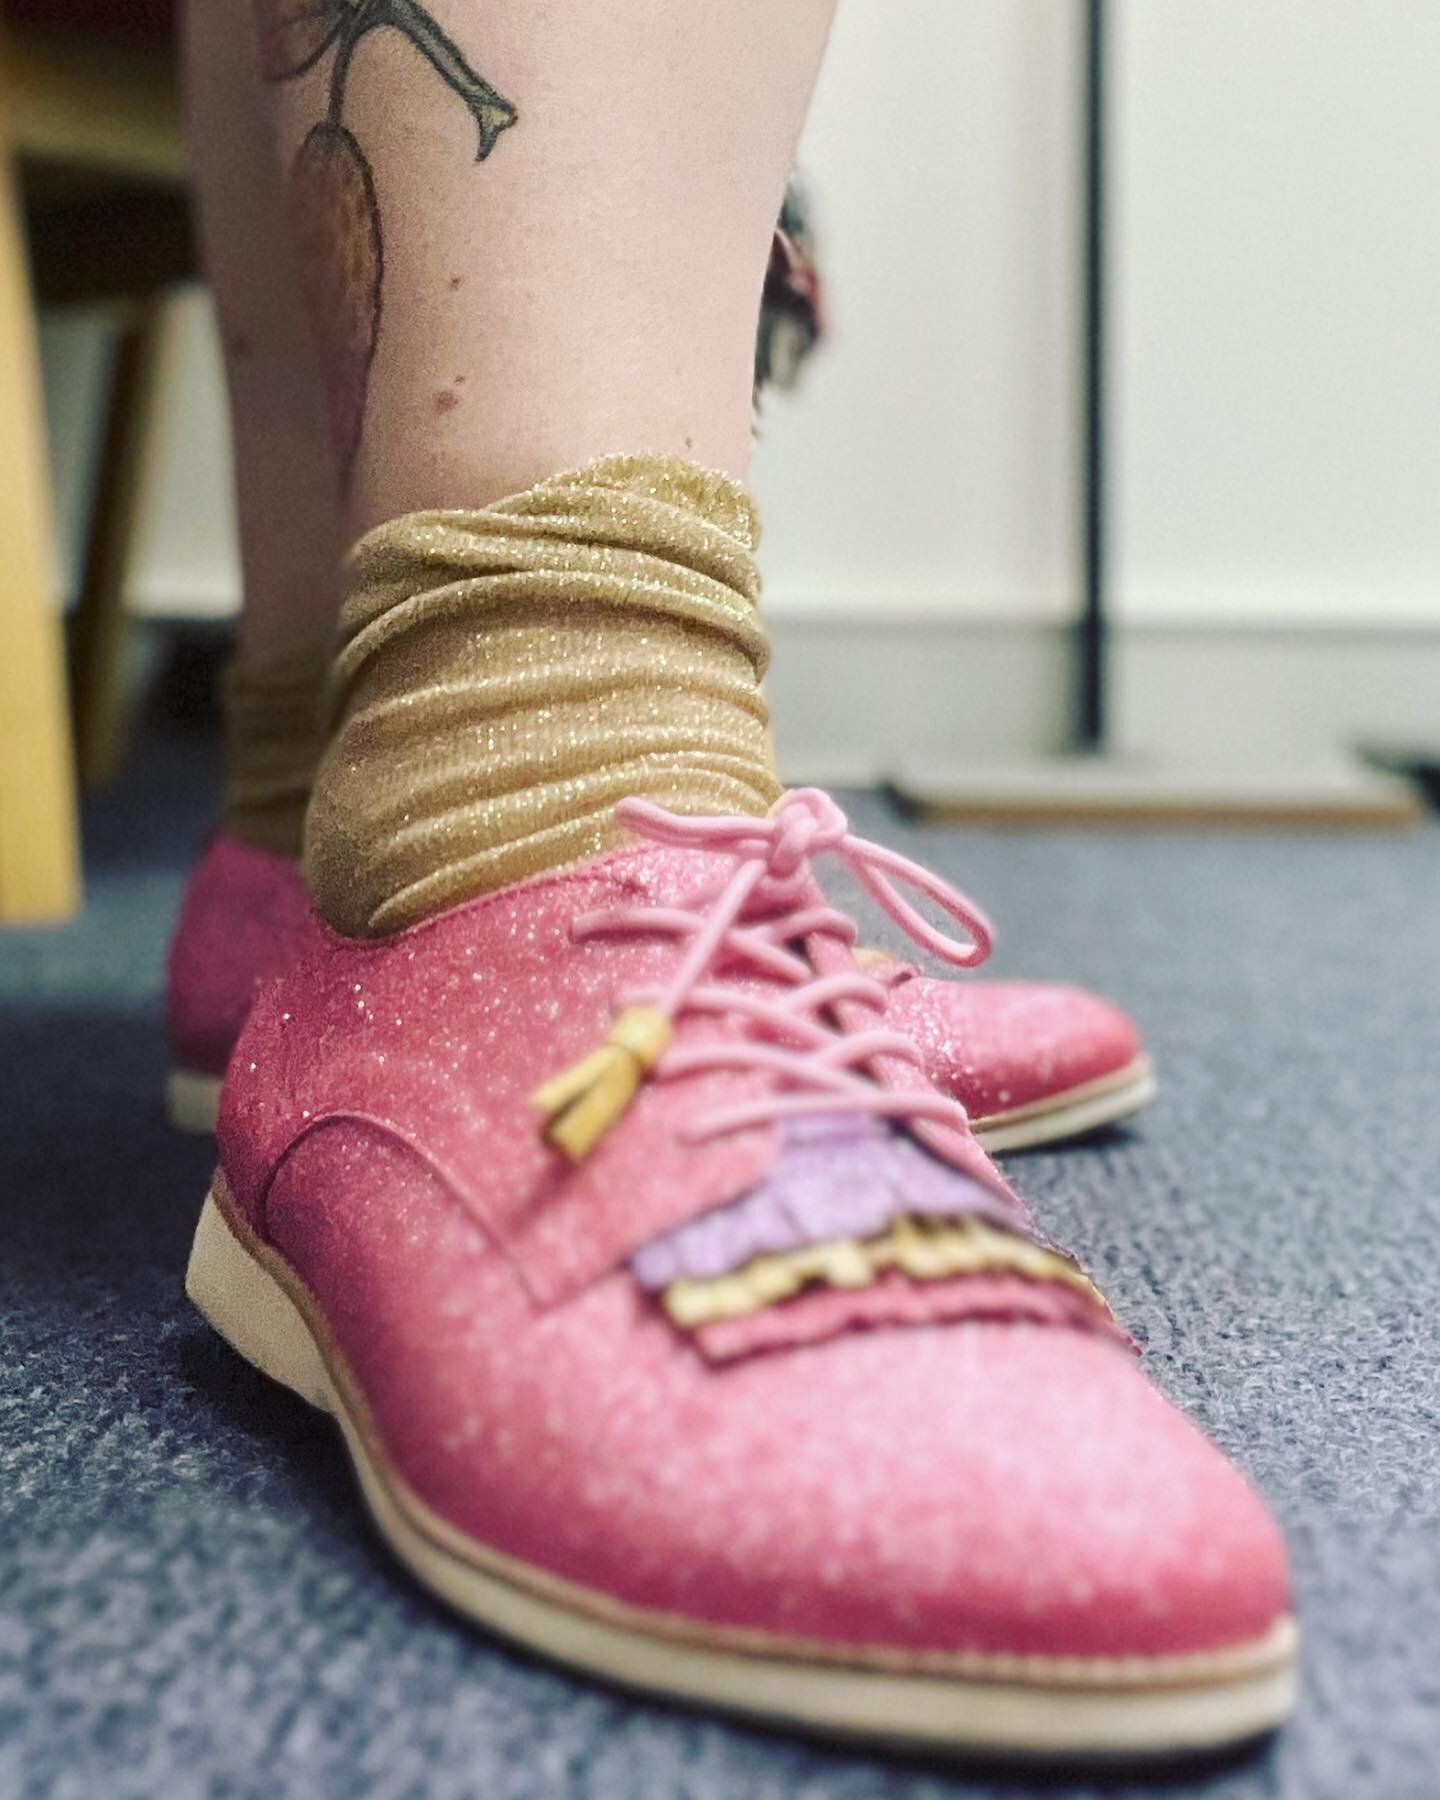 In case you didn&rsquo;t know that I&rsquo;m completely extra, I&rsquo;ve paired sparkly shoes with sparkly socks today. The good thing though? These shoes are lab safe! I can be a serious scientist and a sparkly one too. 

Image: my feet (one shot s